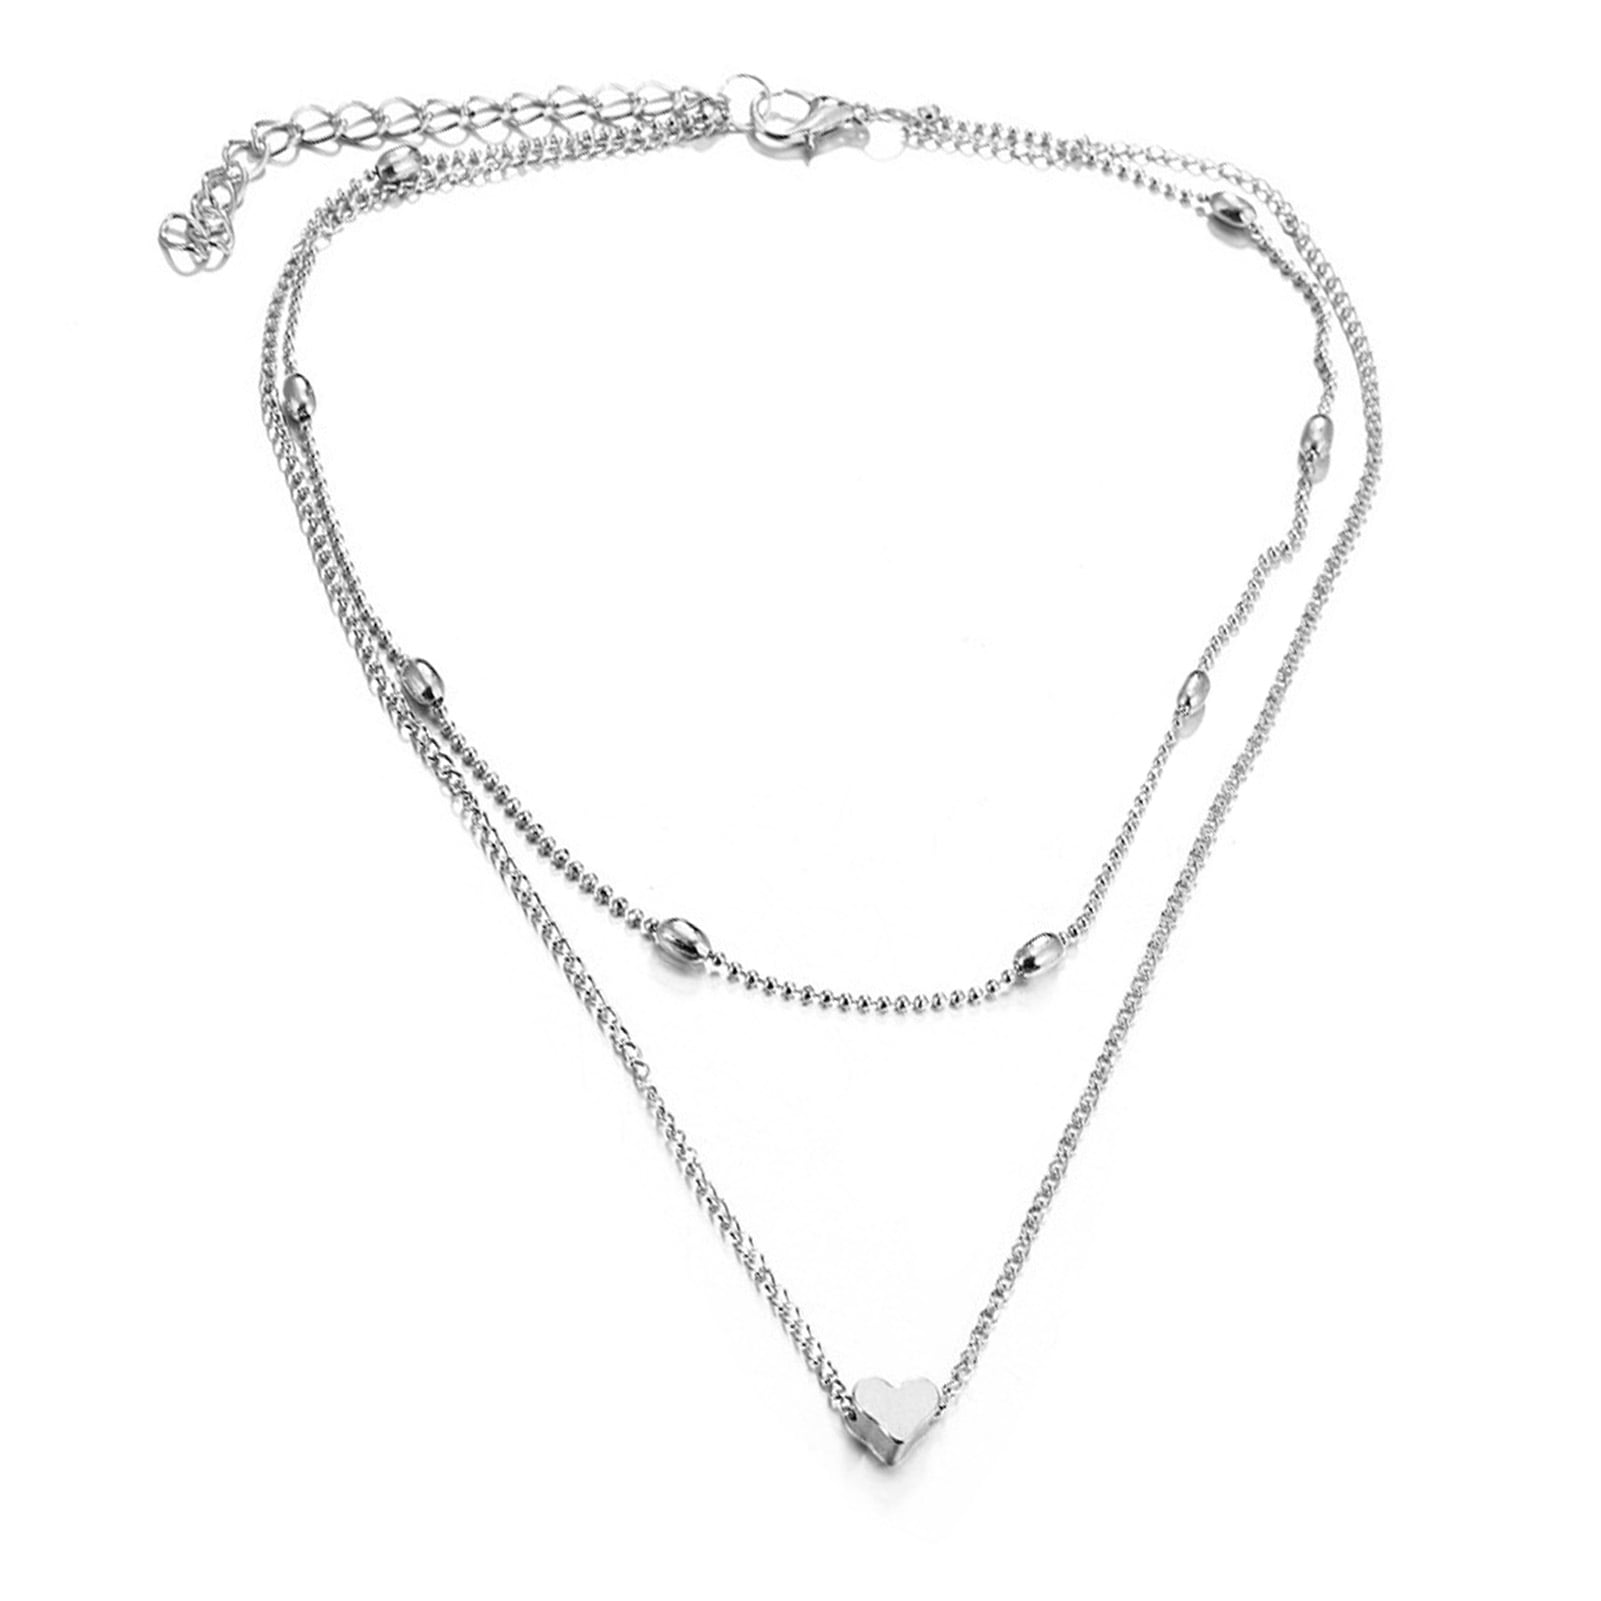 Simple Double Layers Chain Love Heart Pendant Necklace Choker Women Jewelry 